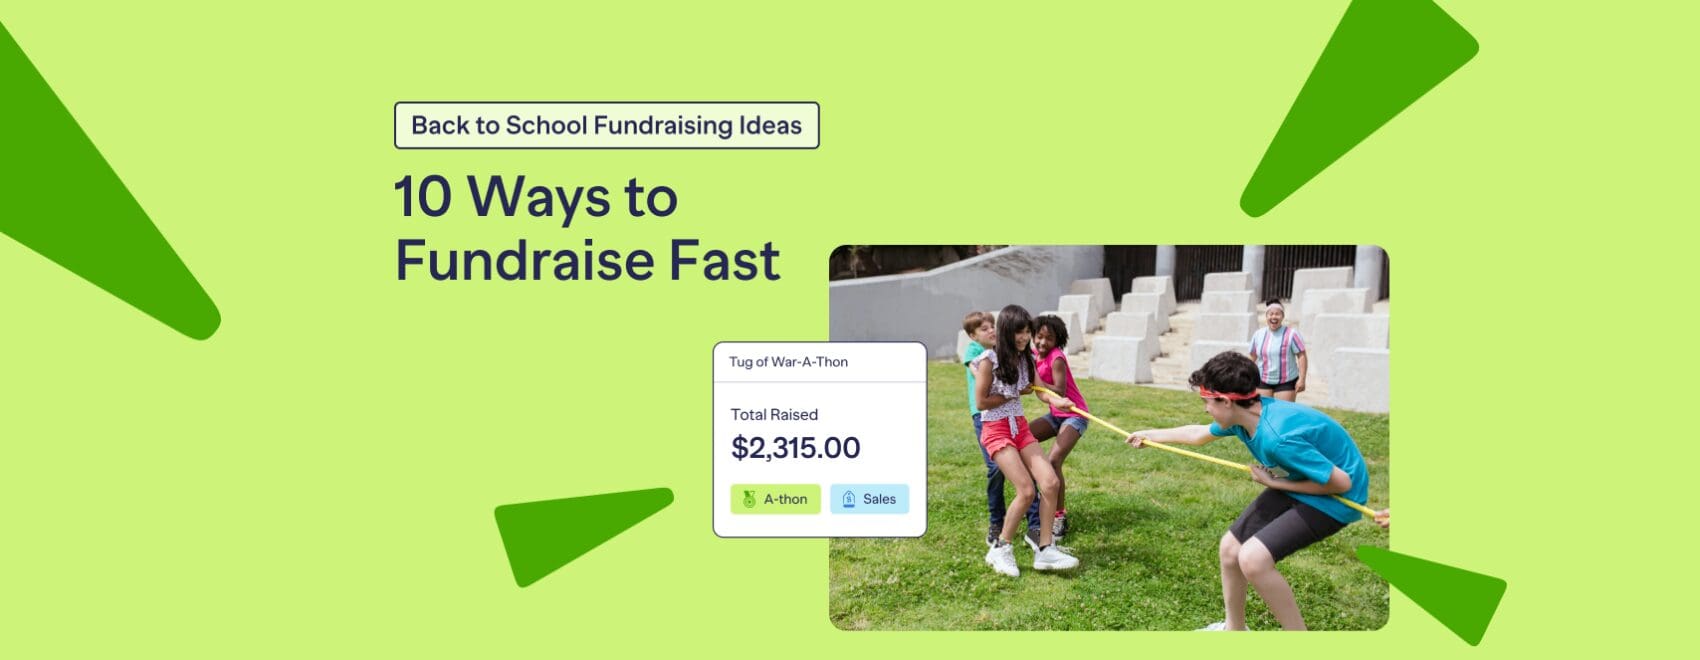 Back to school fundraising ideas 10 ways to fundraise fast